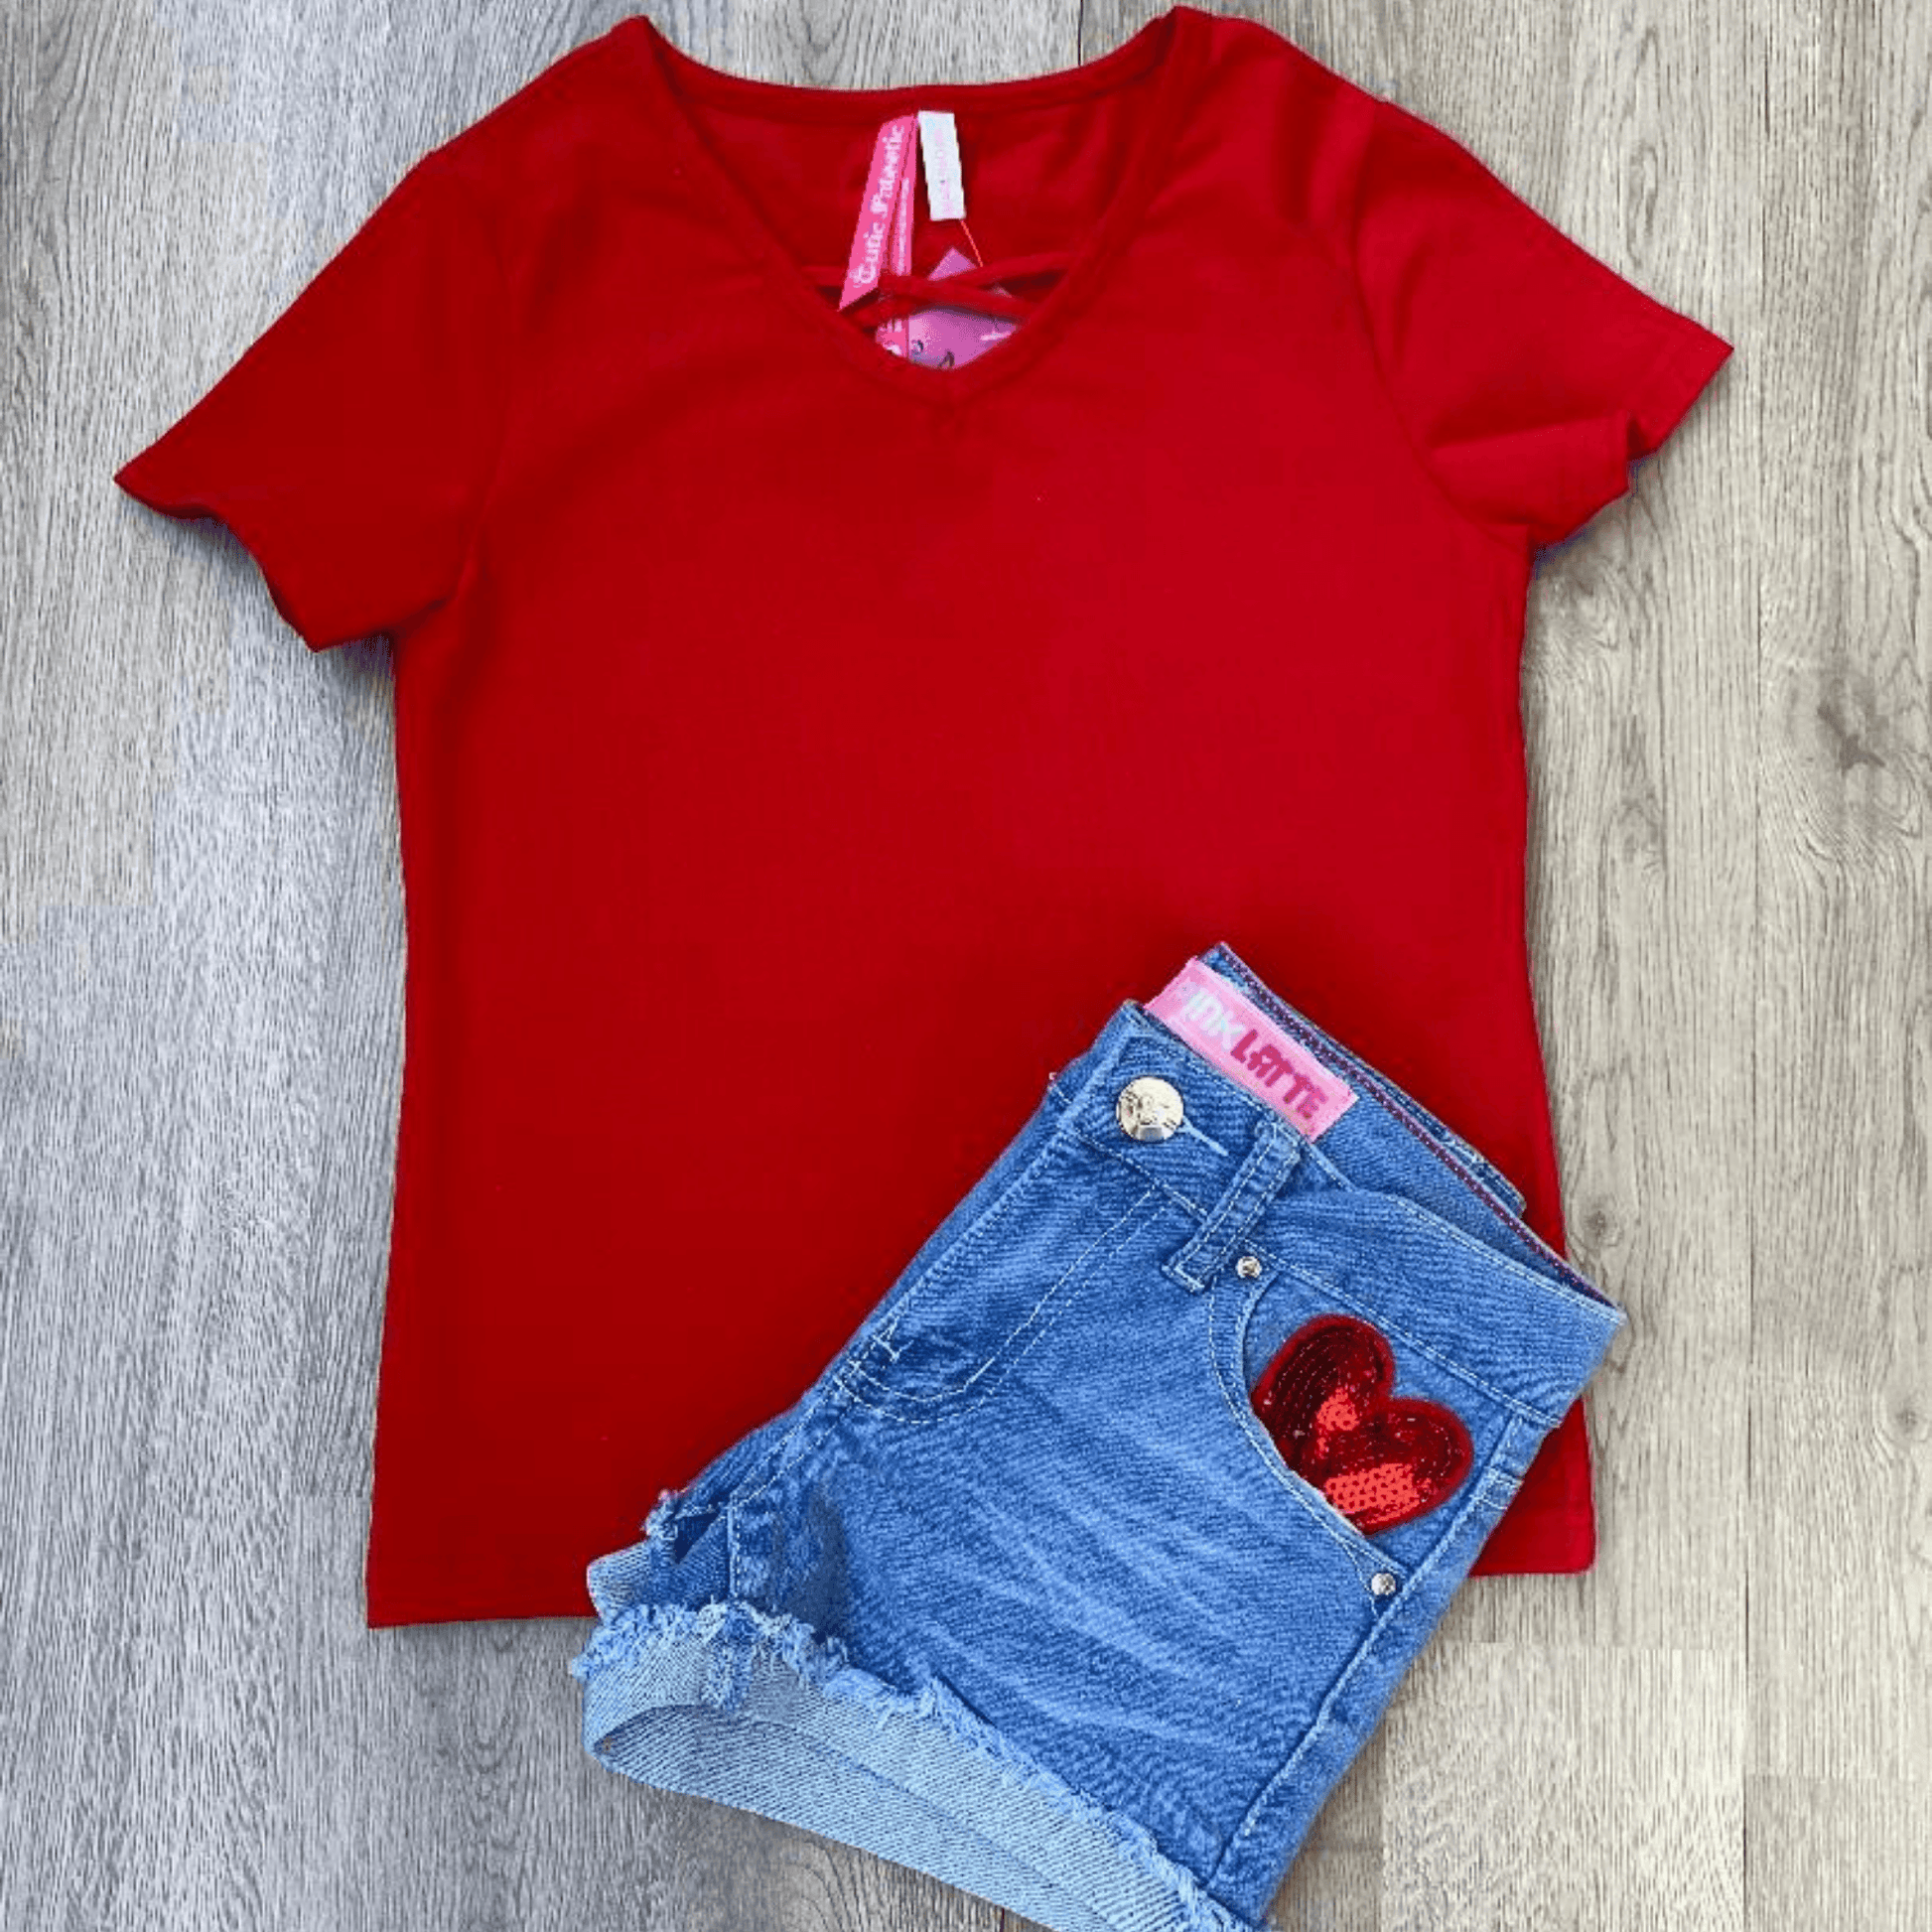 This short set features a short-sleeved red shirt with a criss cross design at the neckline.  The denim shorts feature a sequined heart on both the front and back pockets.  This is an outfit your little fashionista is sure to love.